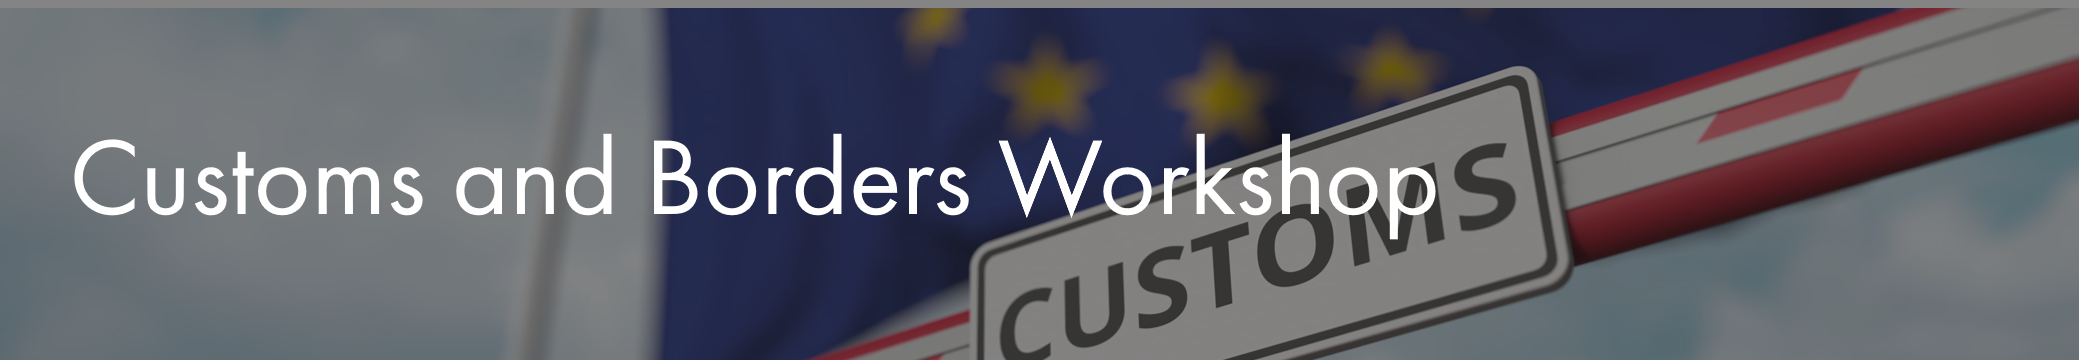 Customs and Borders Workshop banner